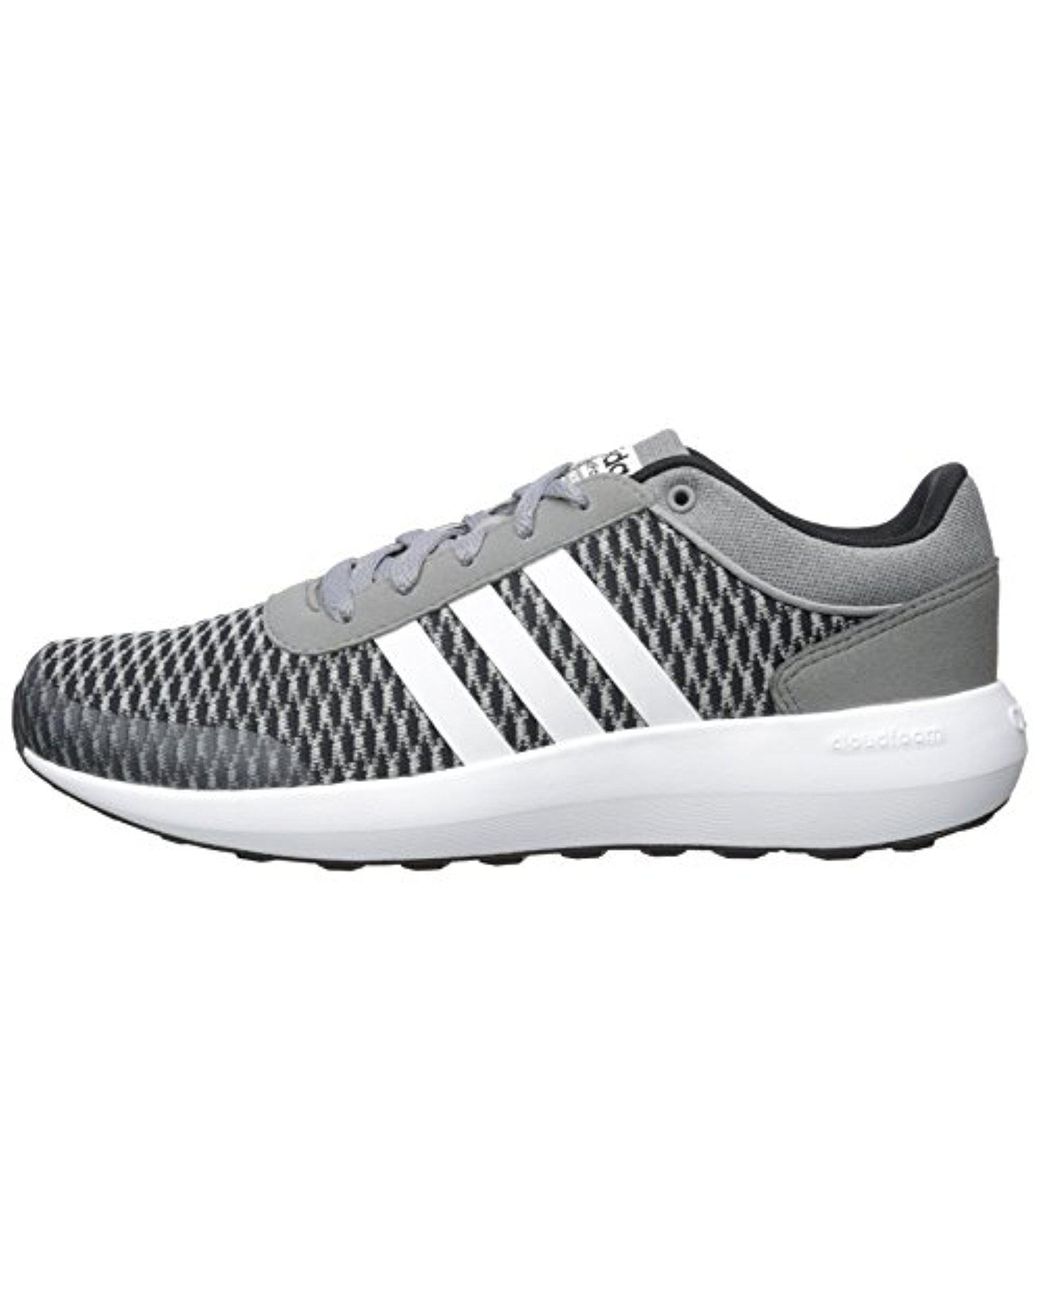 adidas Synthetic Neo Cloudfoam Race Running Shoe in Black/White/Grey (Gray)  for Men | Lyst